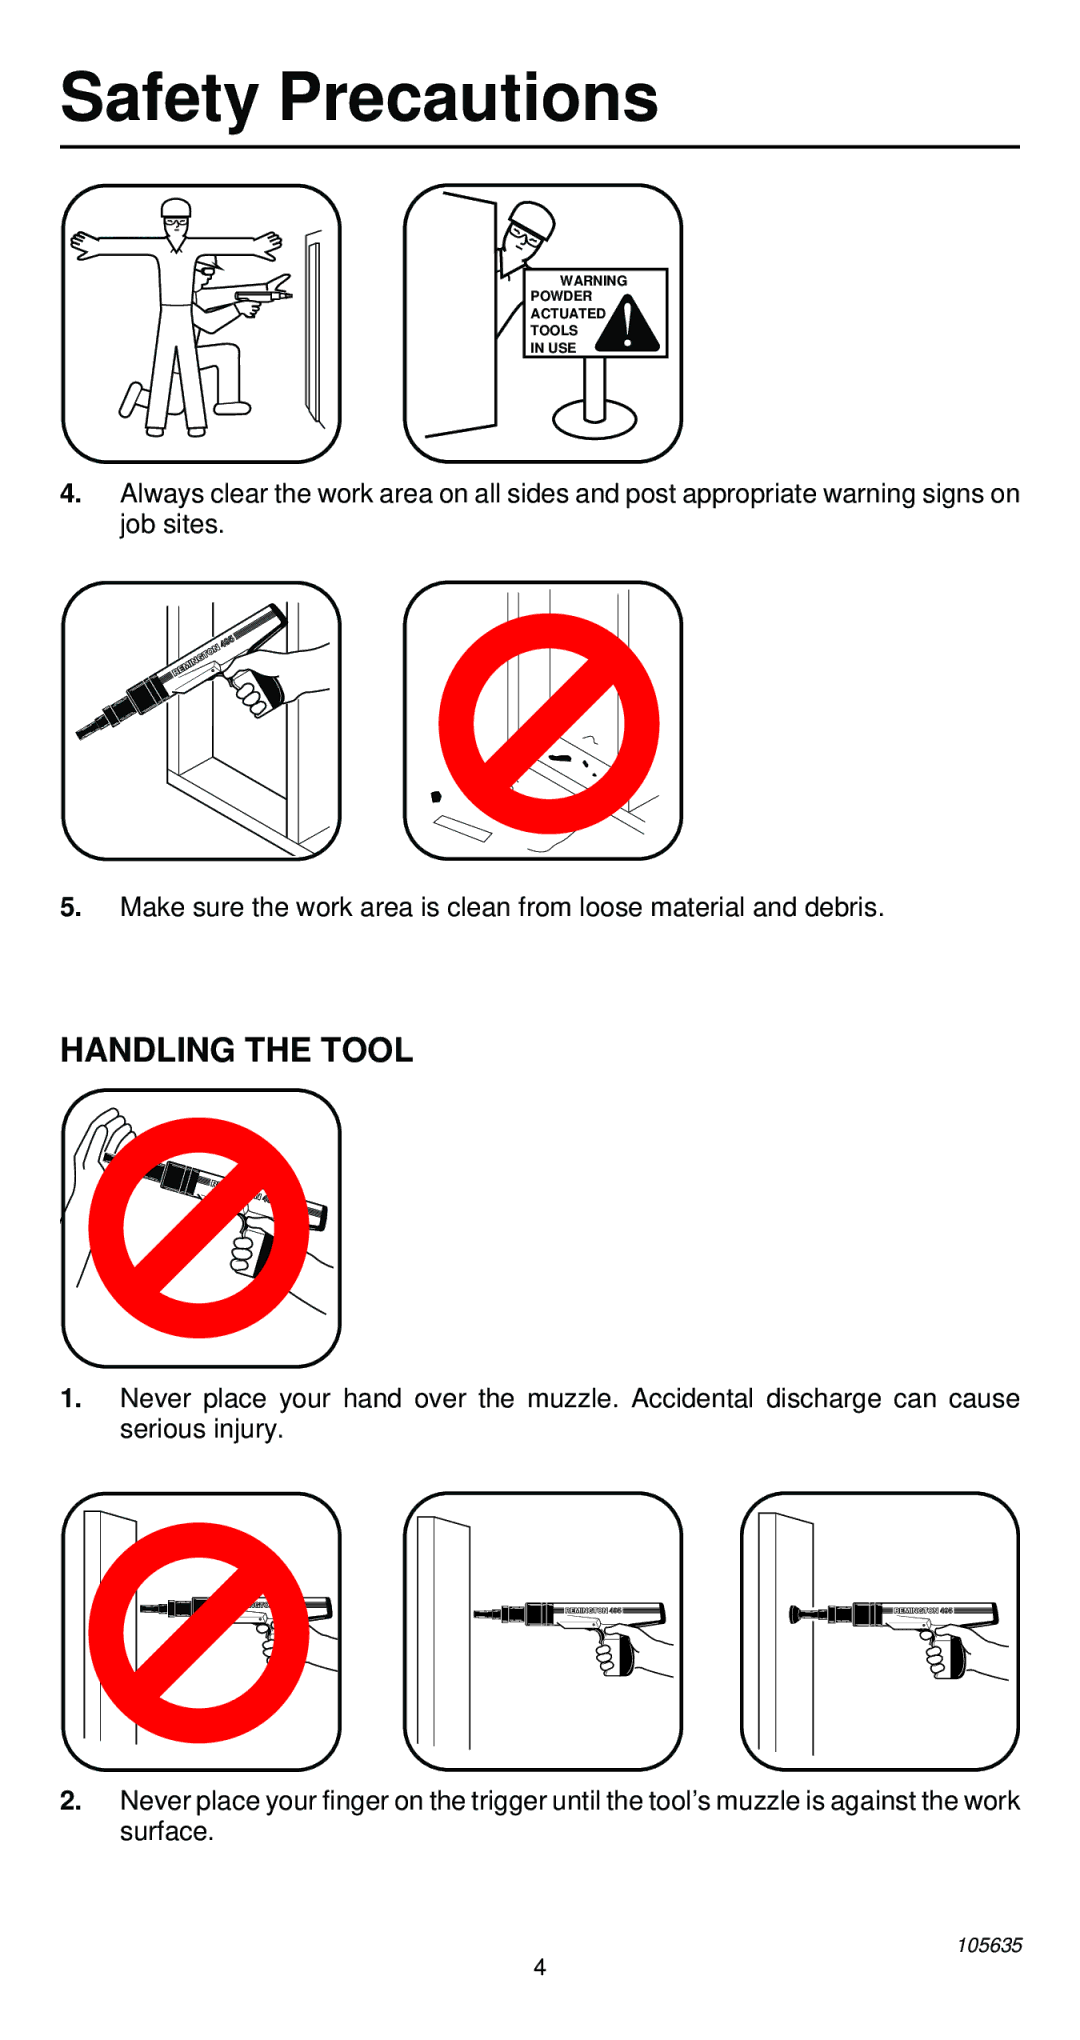 Desa 496 operating instructions Safety Precautions, Handling the Tool 